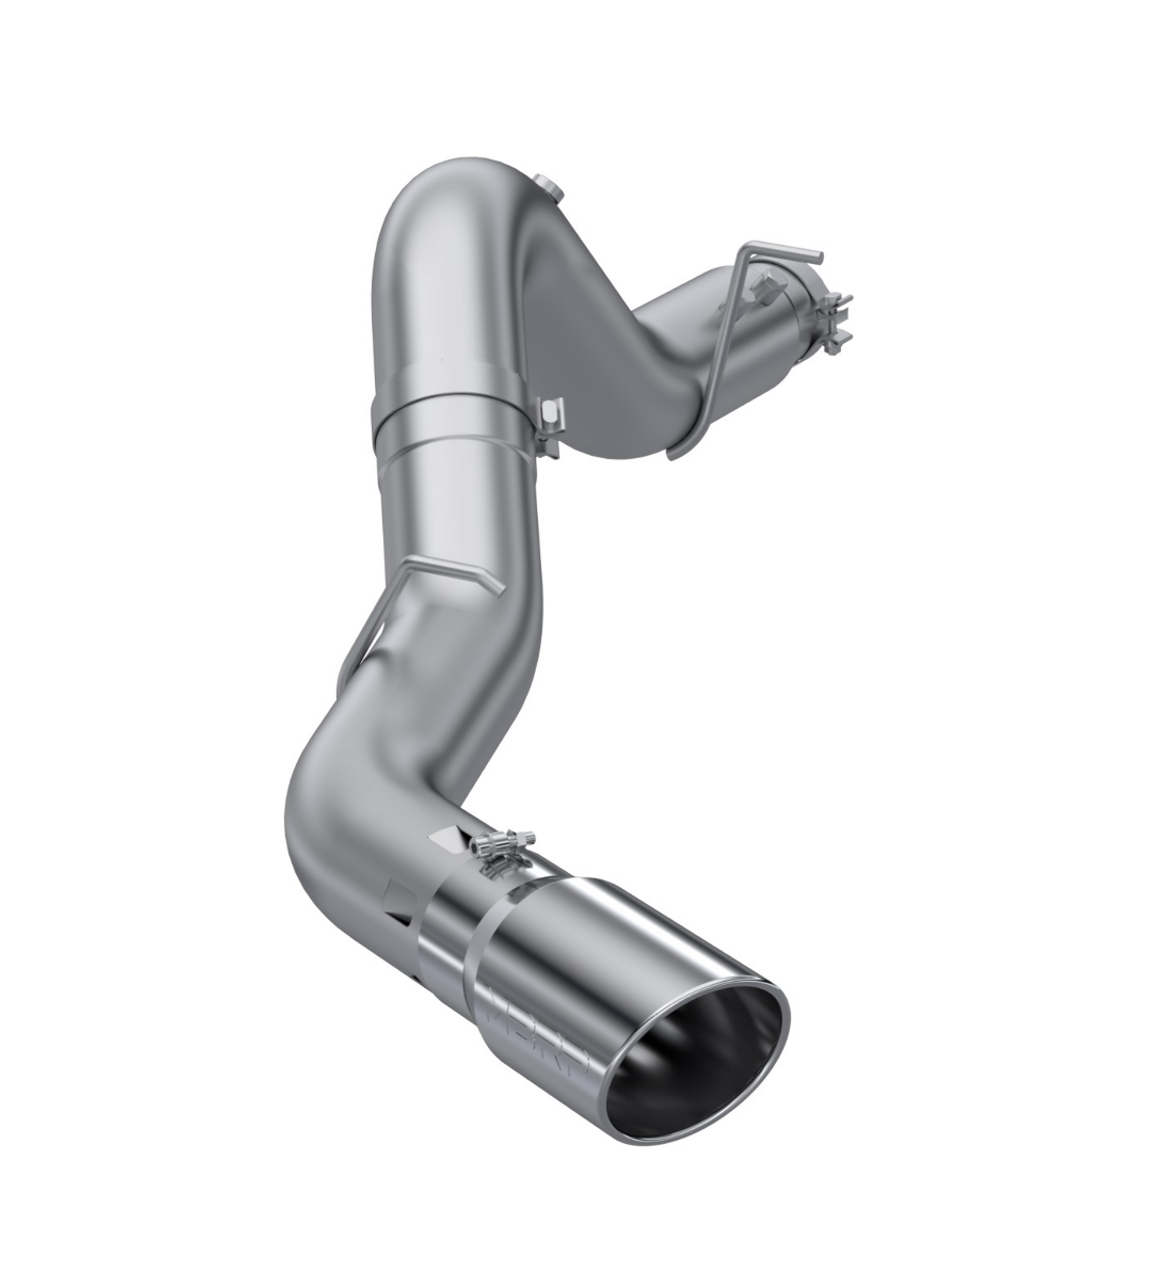 MBRP S60610409 5" Filter Back Exhaust for 2020-2023 Chevy GMC Duramax Diesel 6.6